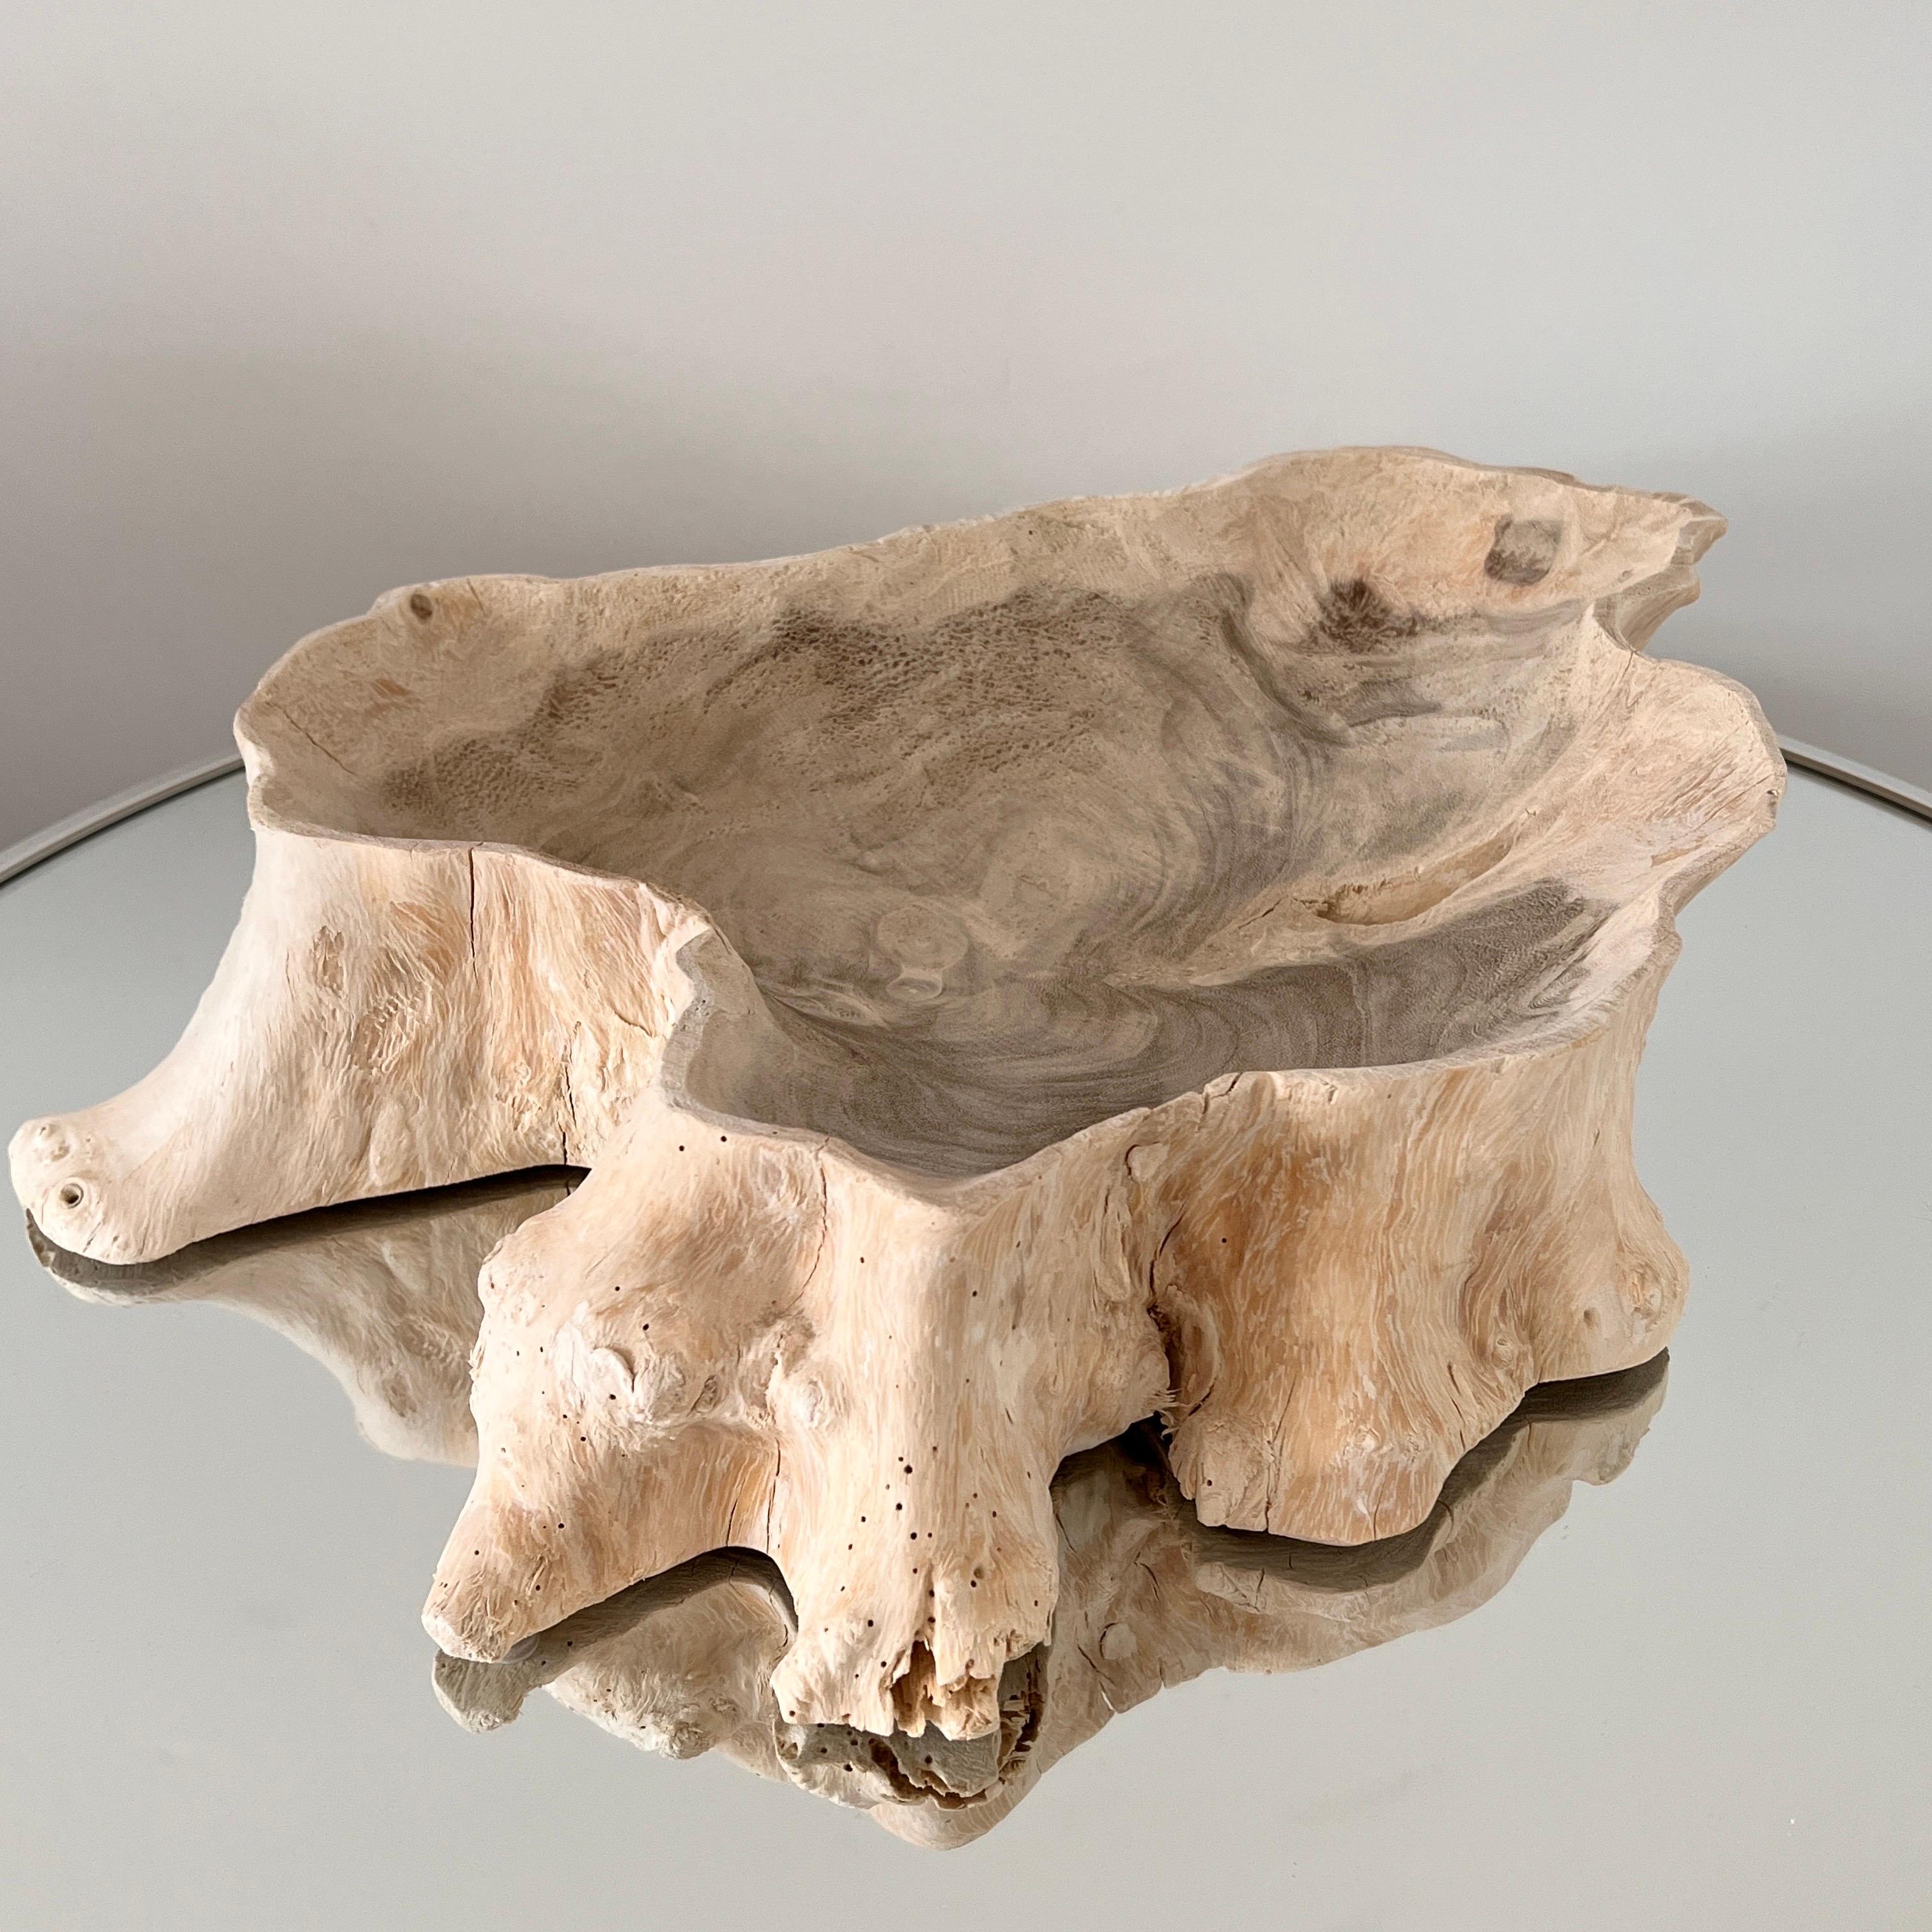 Organic Bleached Teak Root Wood Bowl with Live Edges, Indonesia 1